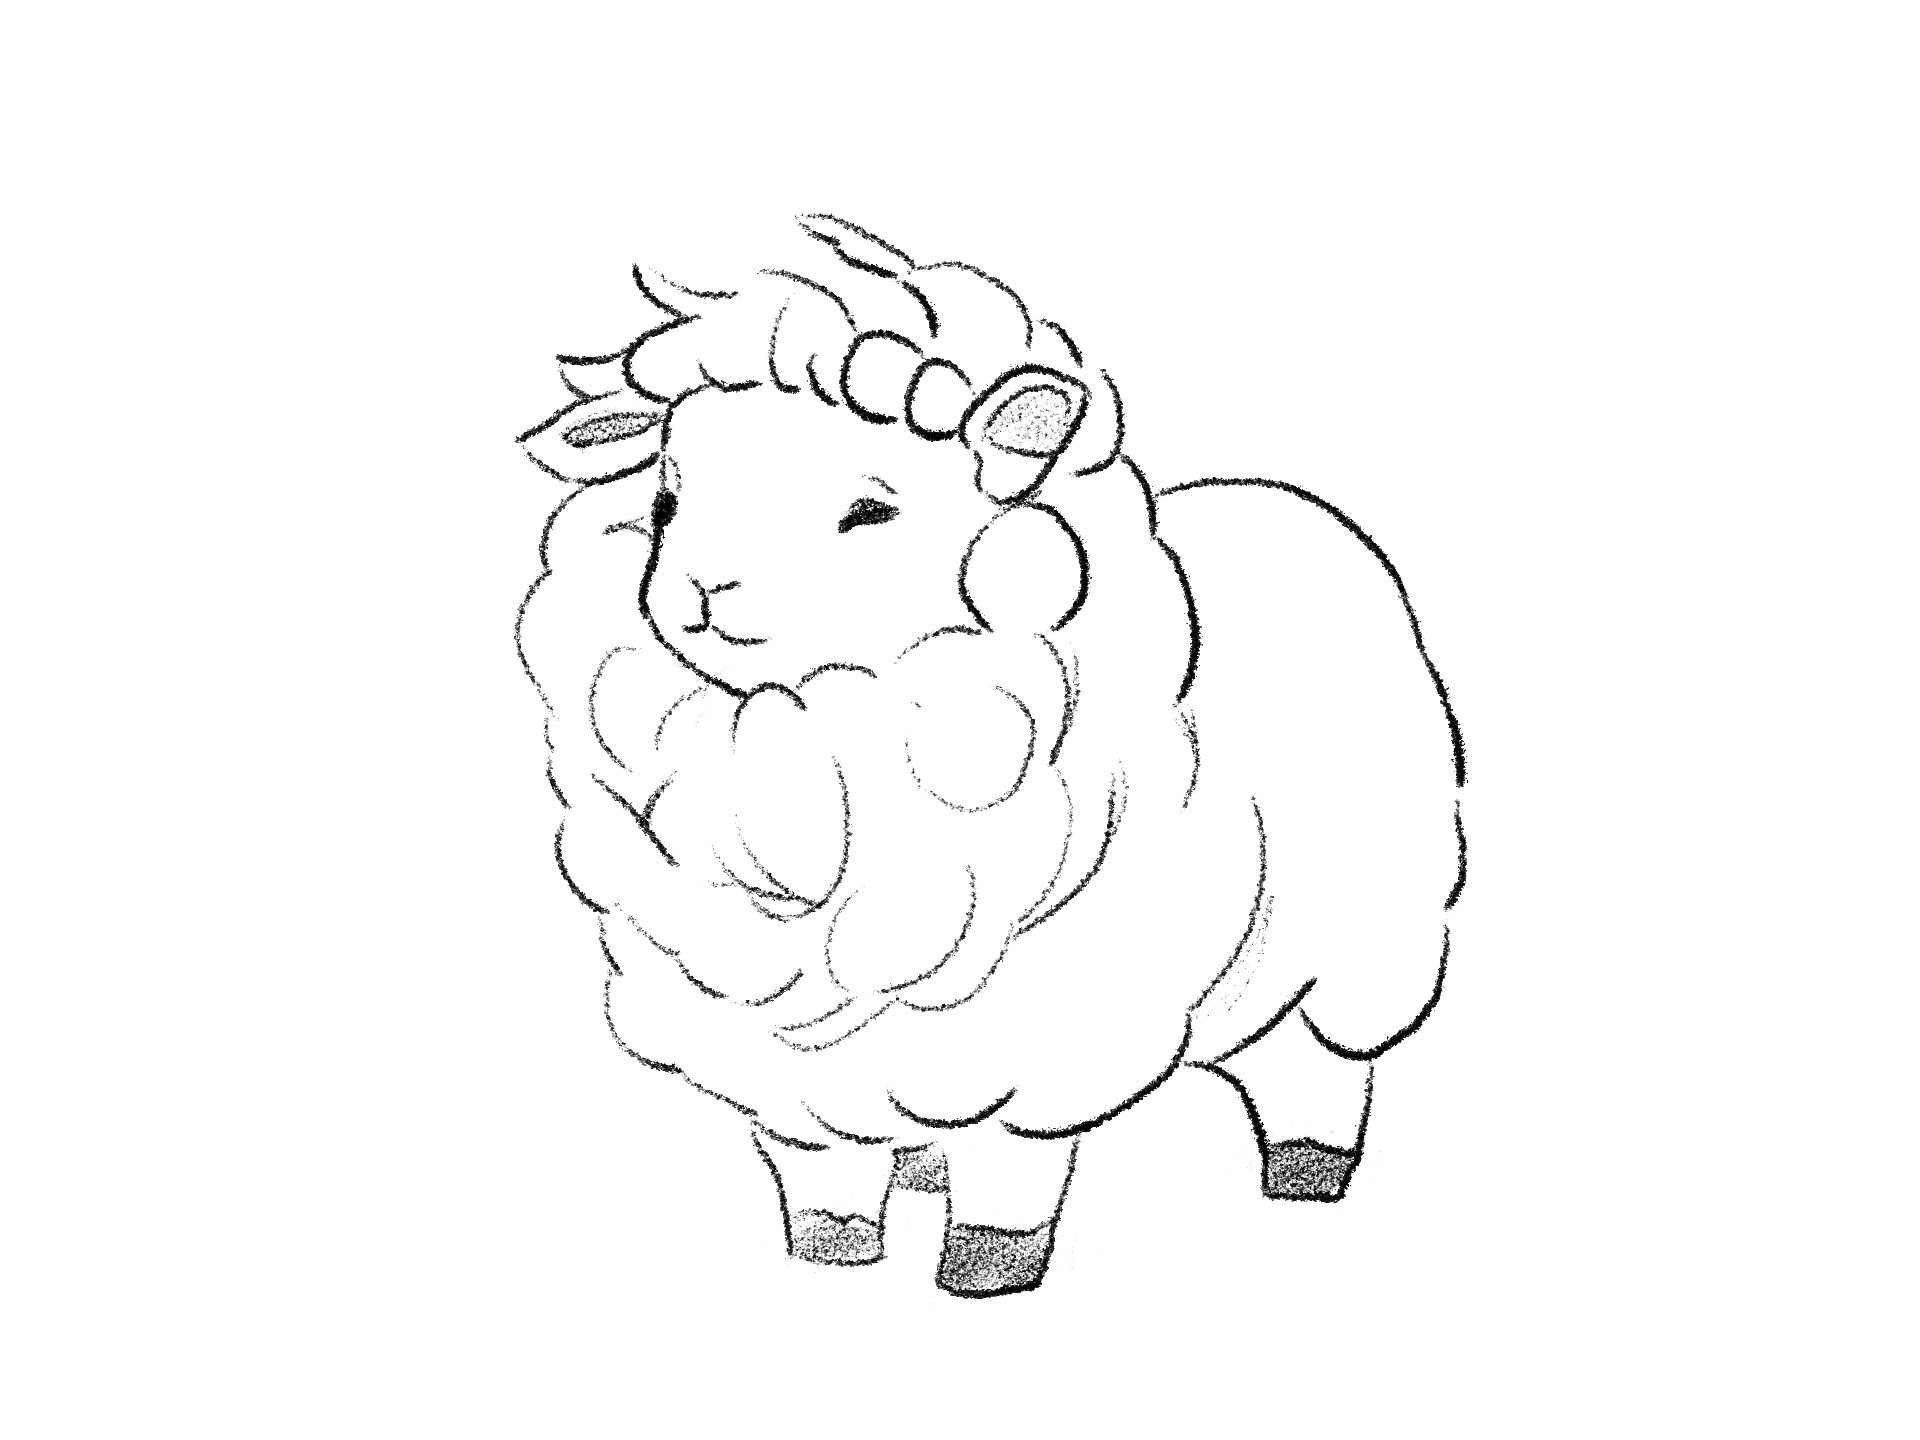 A sheep, from Select Daisies, Sheep, and the Hunter Daisies, Sheep, and the Hunter, a short story